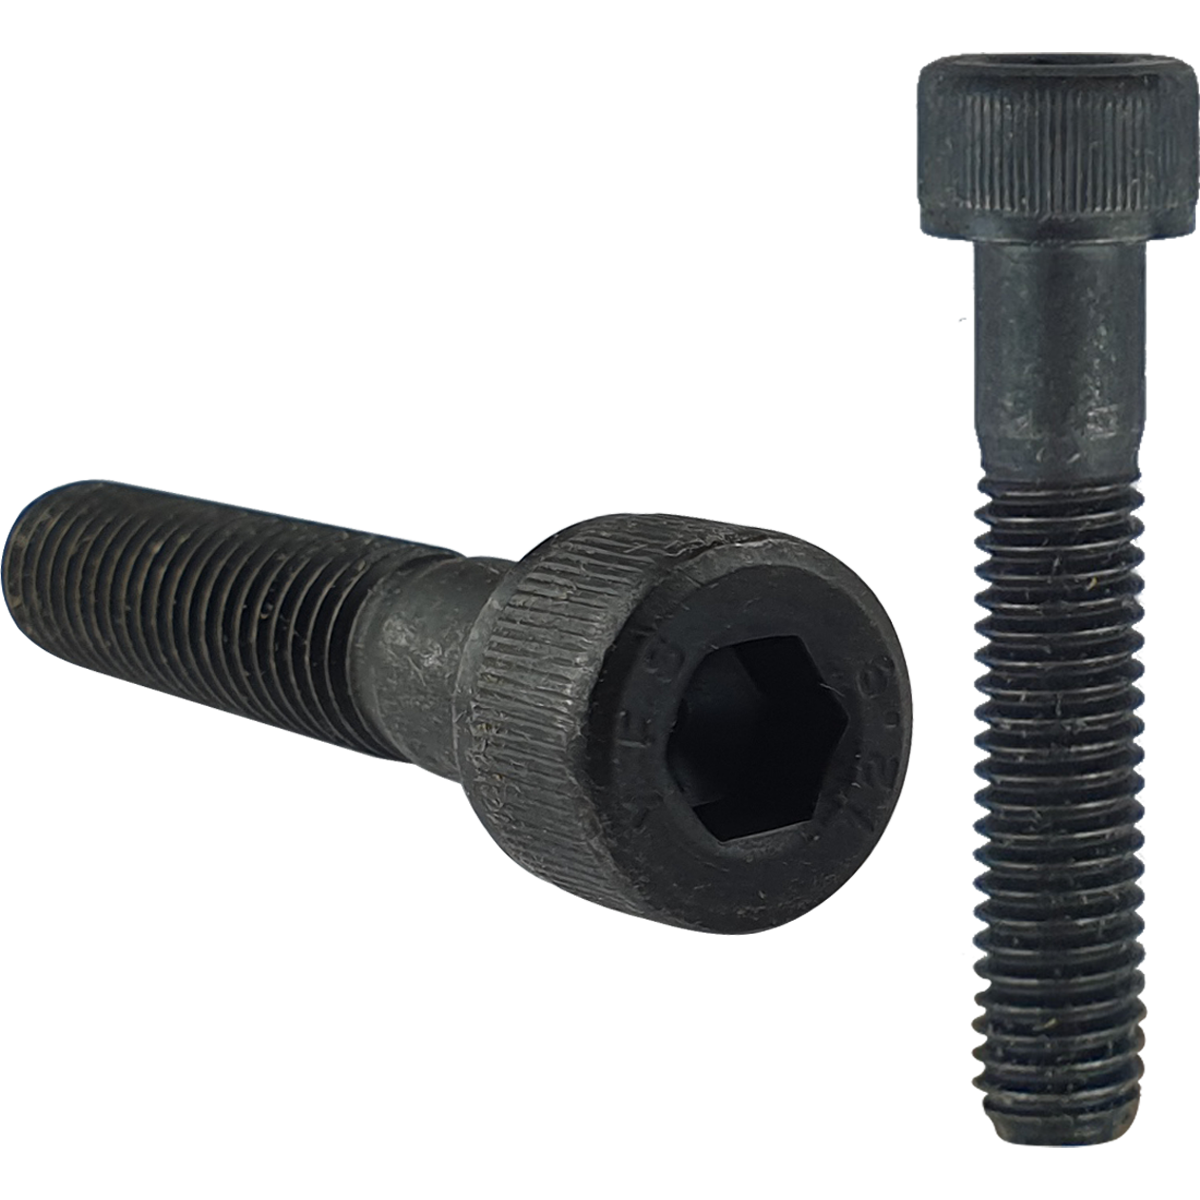 Self-colour, socket cap head screws, know as socket screws. Coated with black-oxide passivation